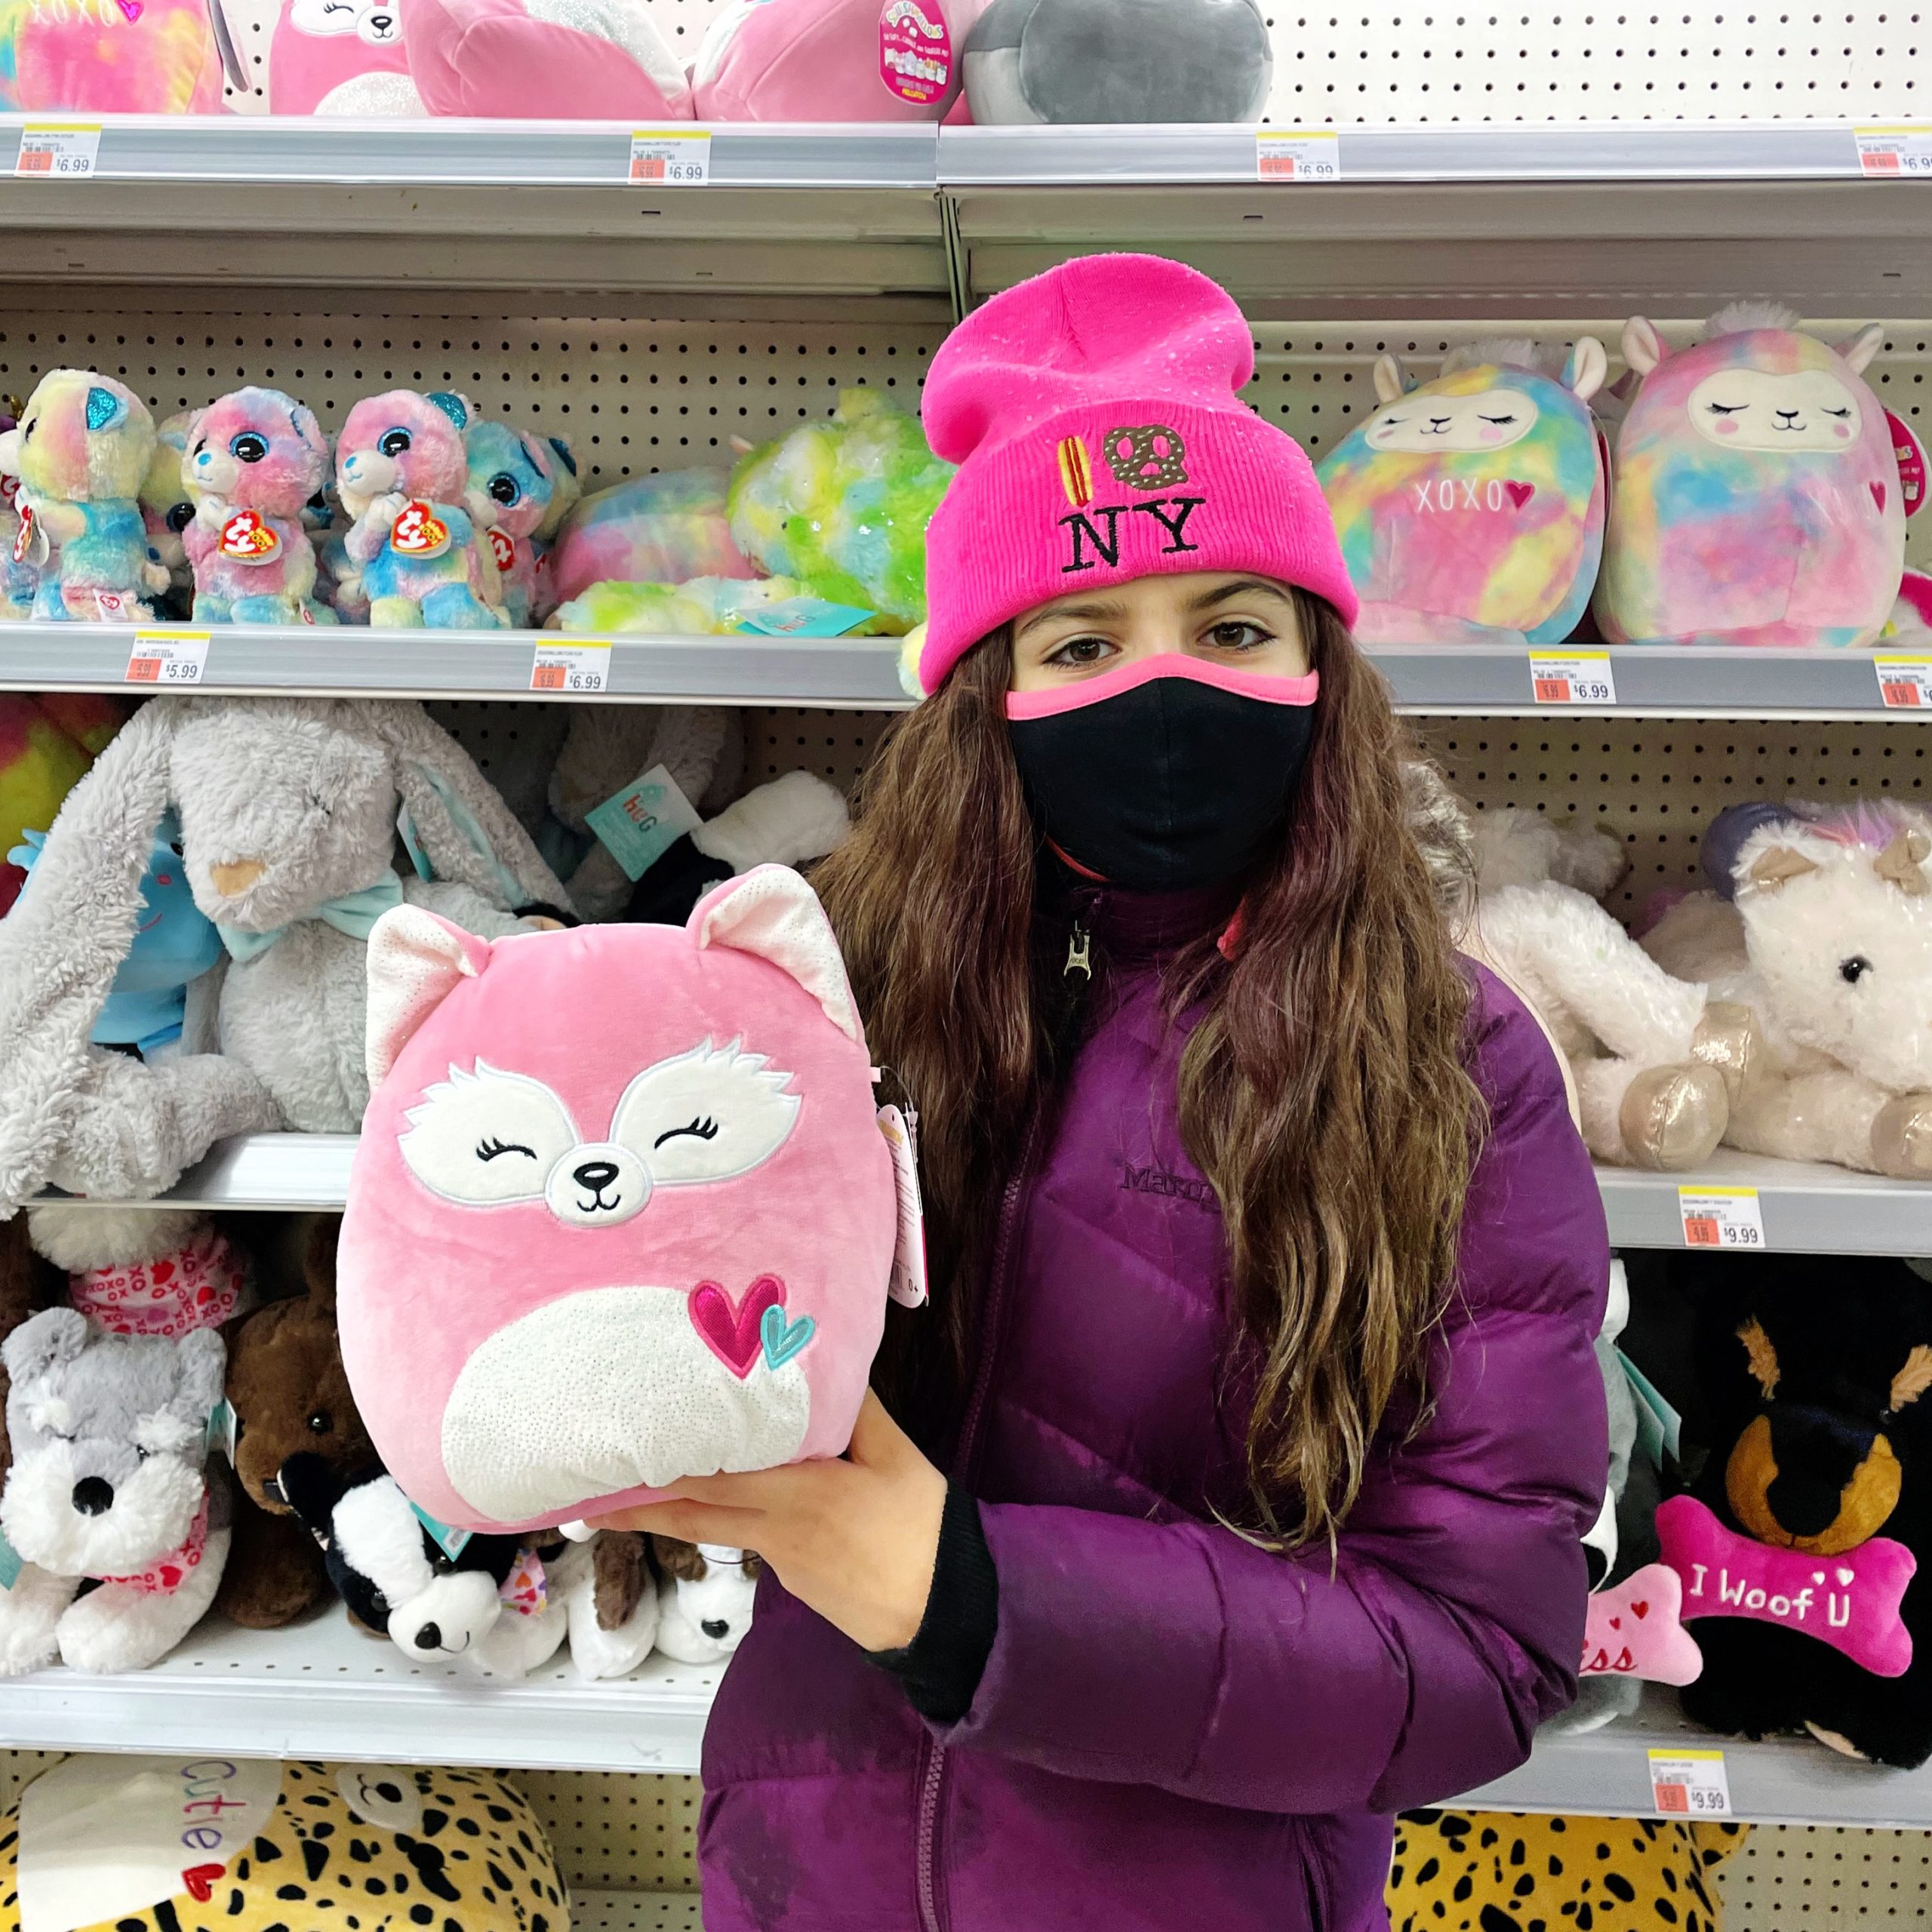 Pets at Home - We can't get enough of these Squishmallows